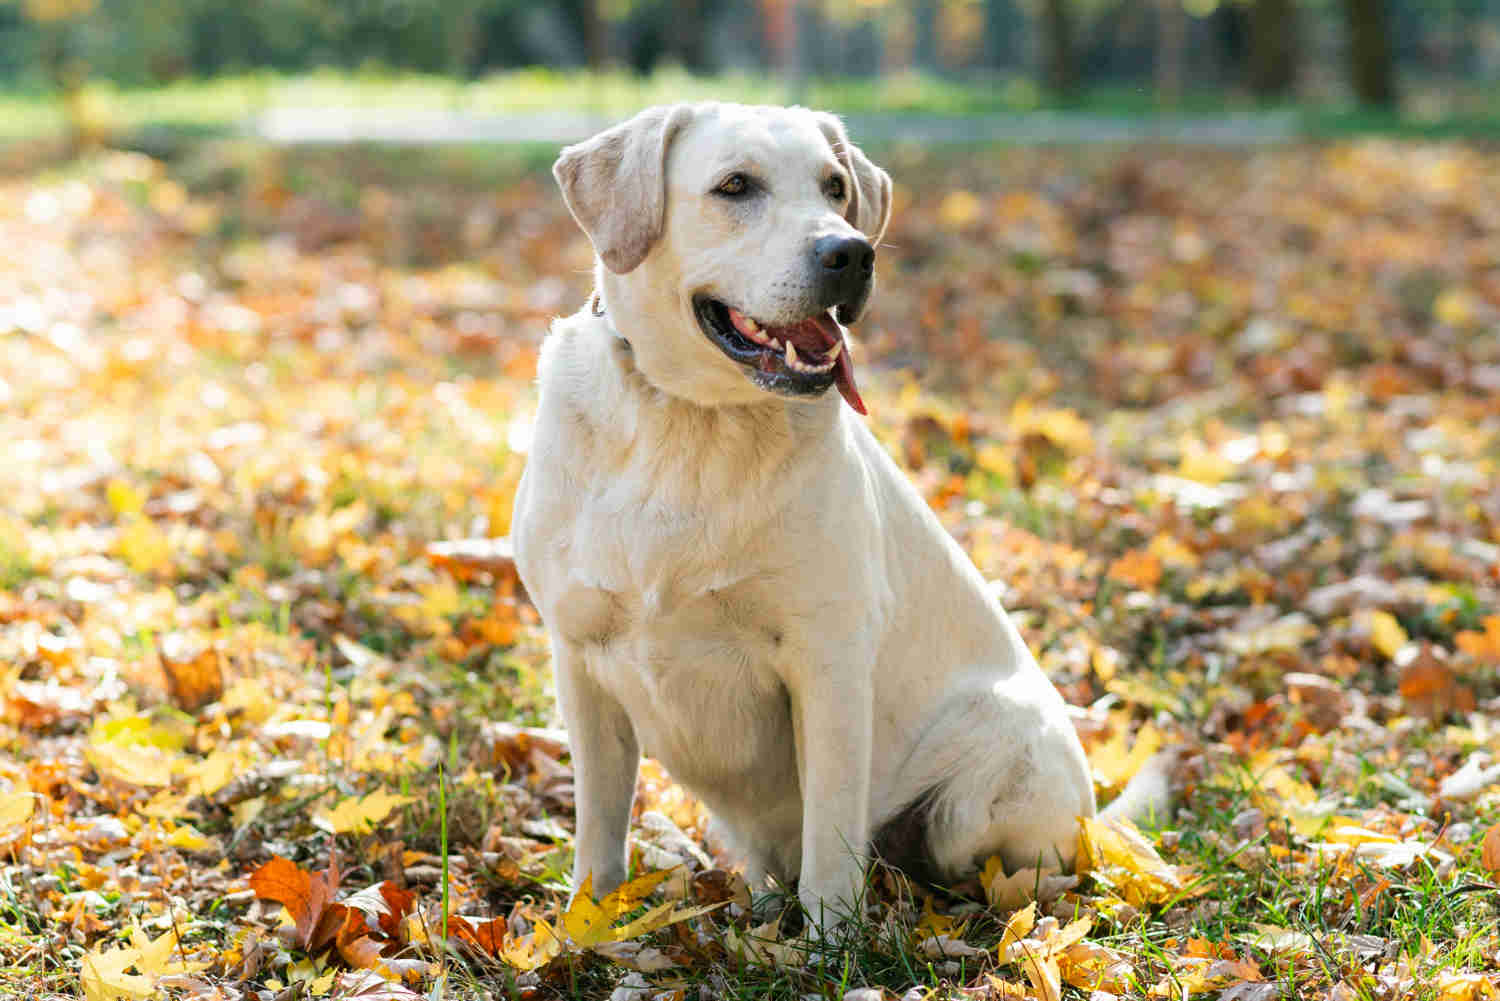 Is Your Labrador Retriever Bored or Frustrated? Here are the Tell-Tale Signs